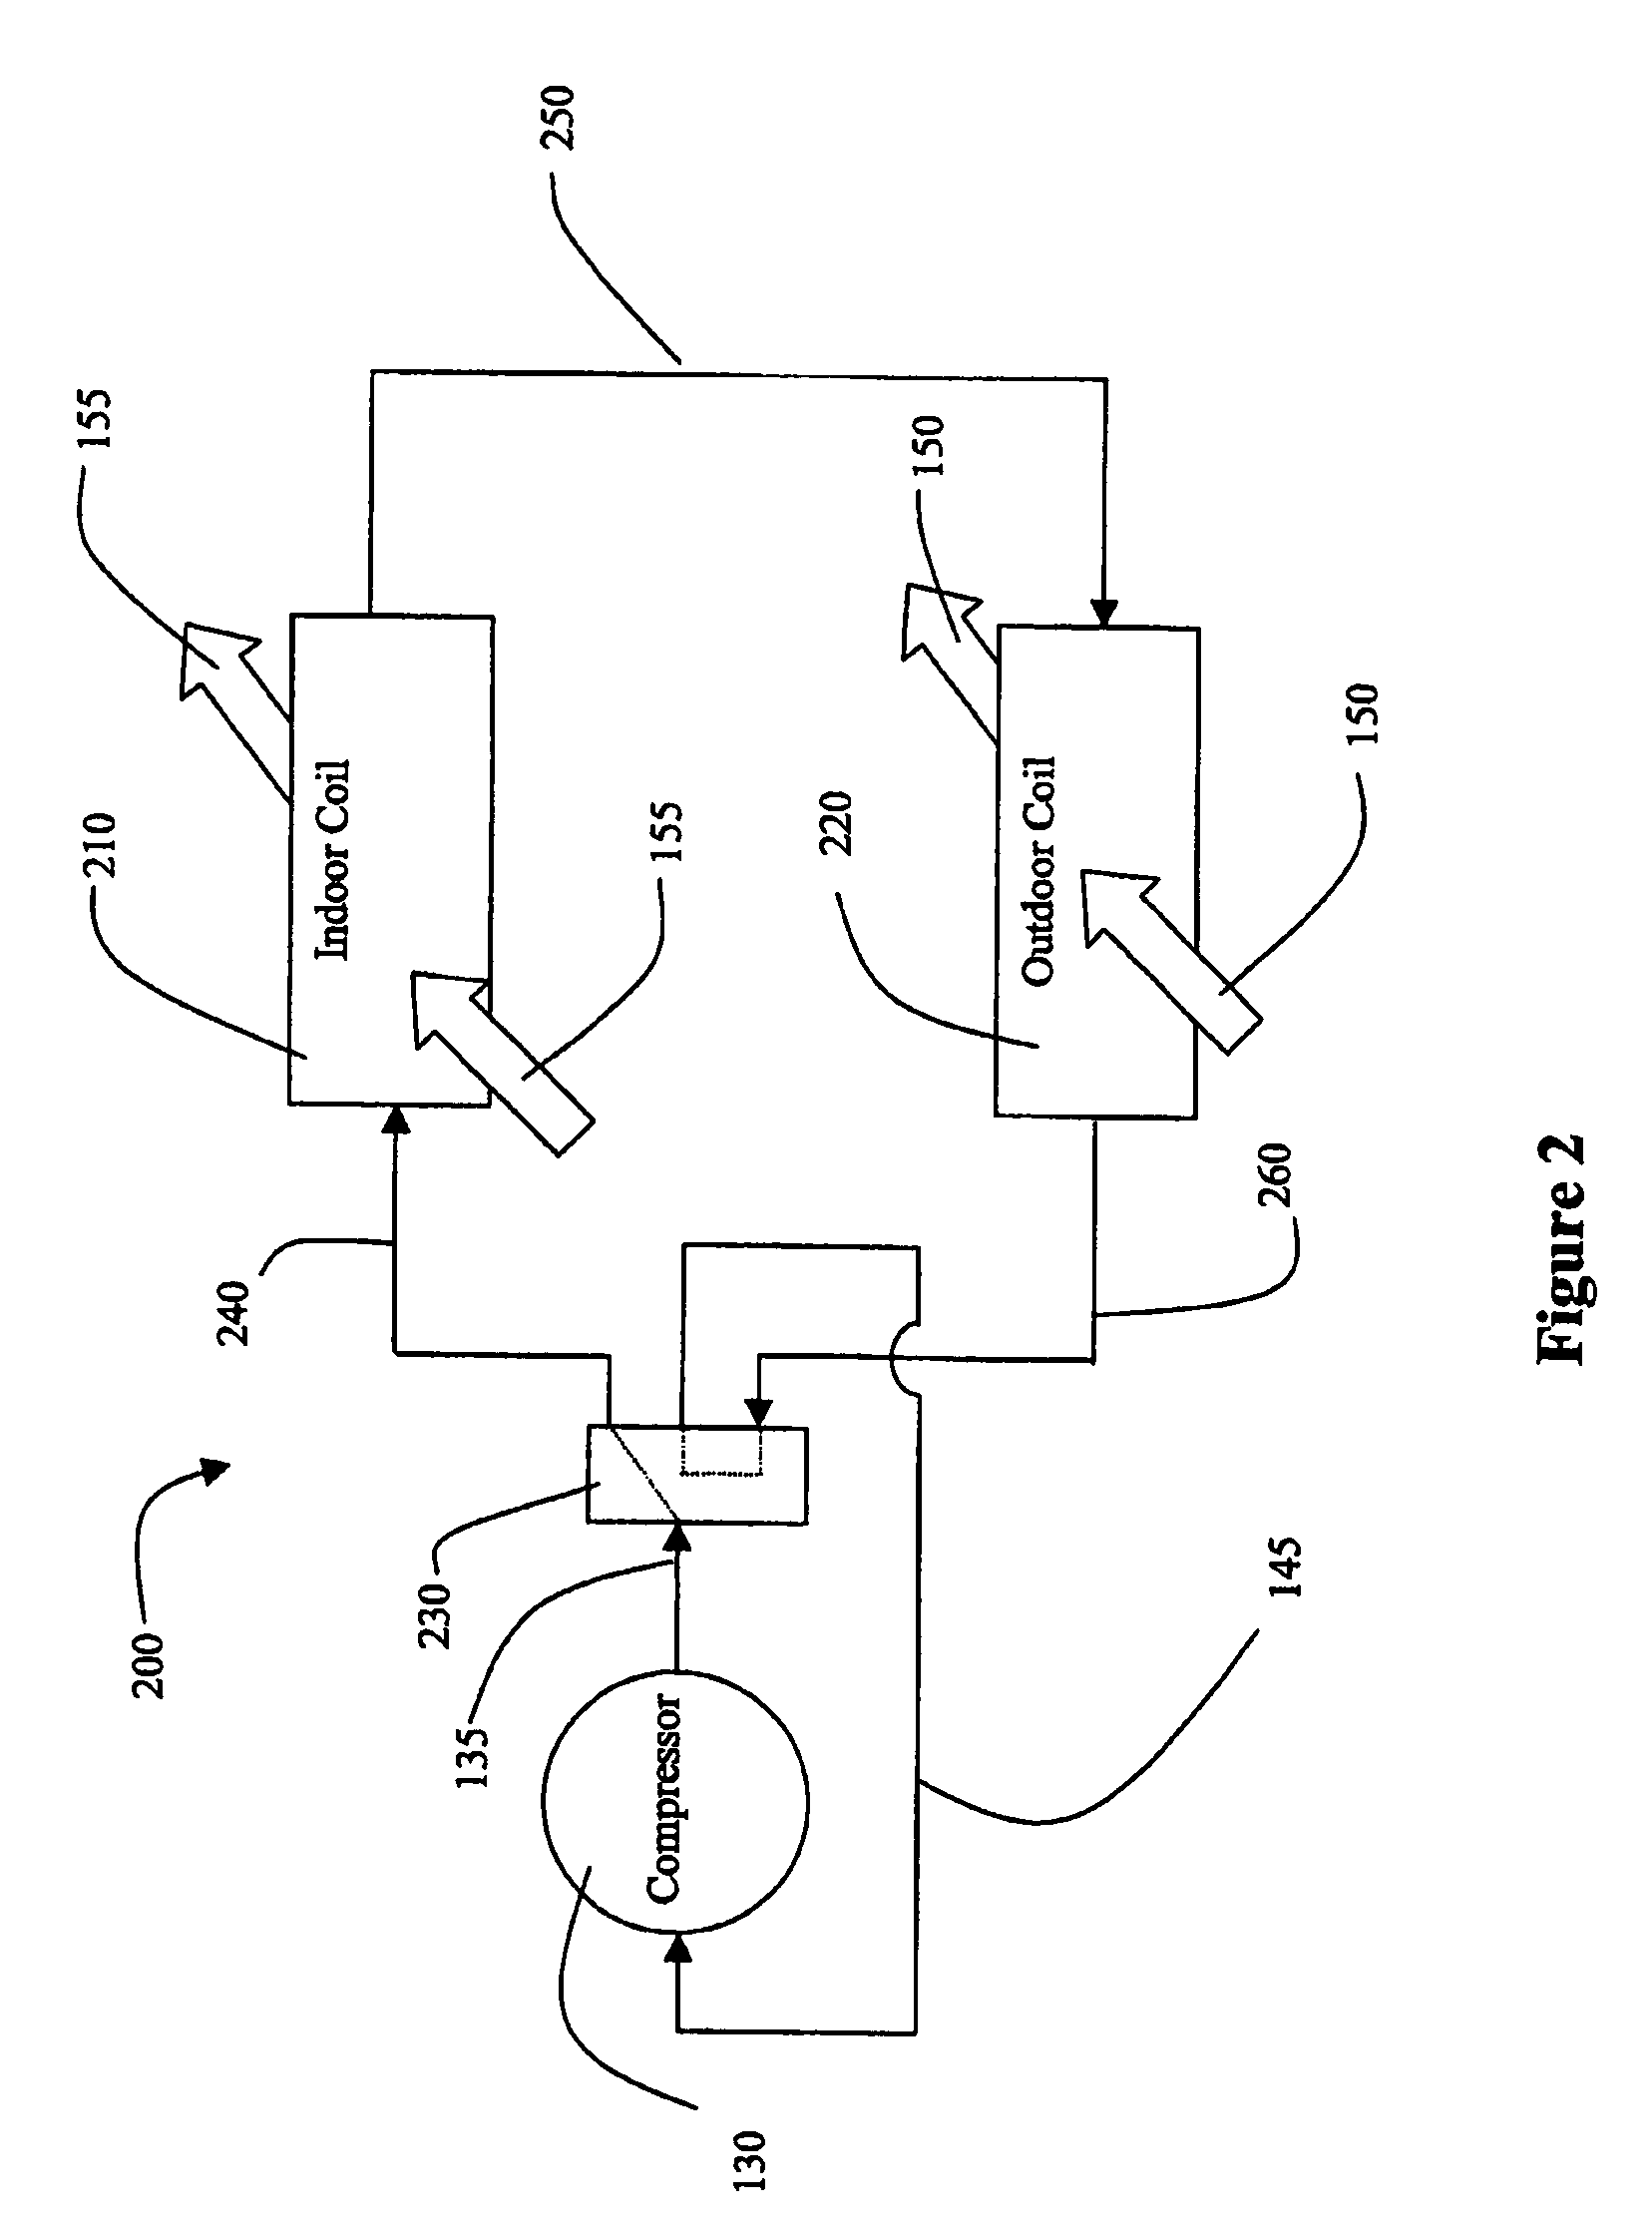 Method and apparatus to sense and establish operation mode for an HVAC control